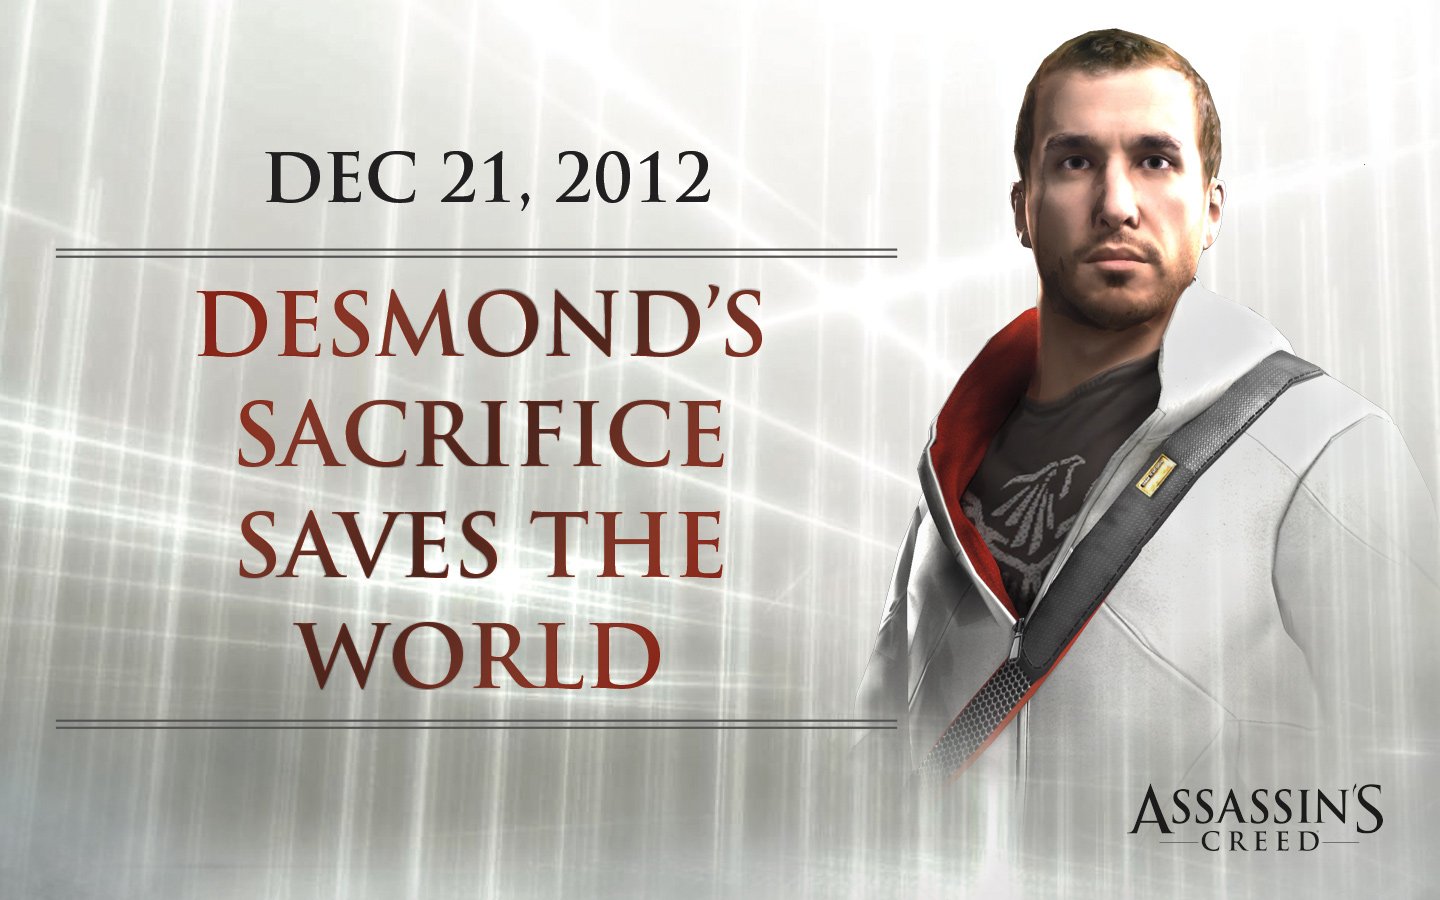 Assassin's Creed on Twitter: "On this day, Miles sacrificed his to save the world. https://t.co/feGFsXnEDR" / X